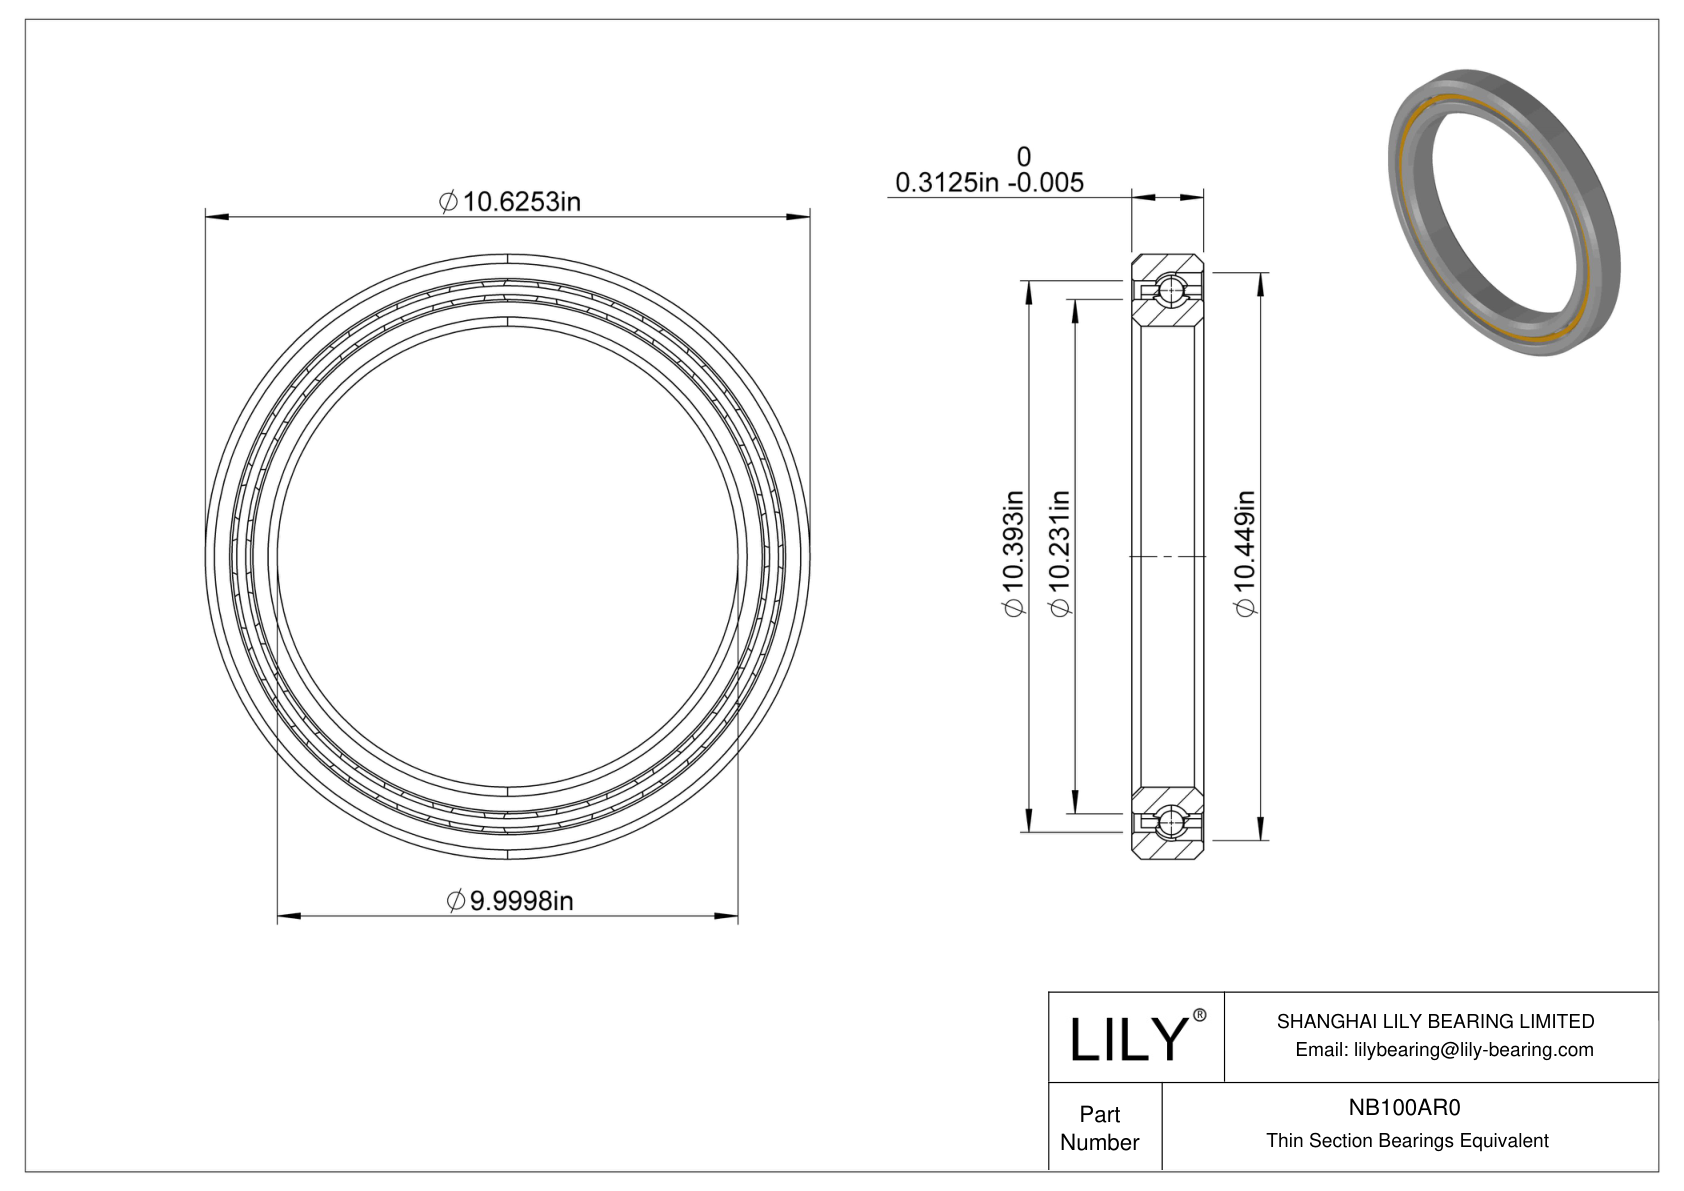 NB100AR0 Constant Section (CS) Bearings cad drawing